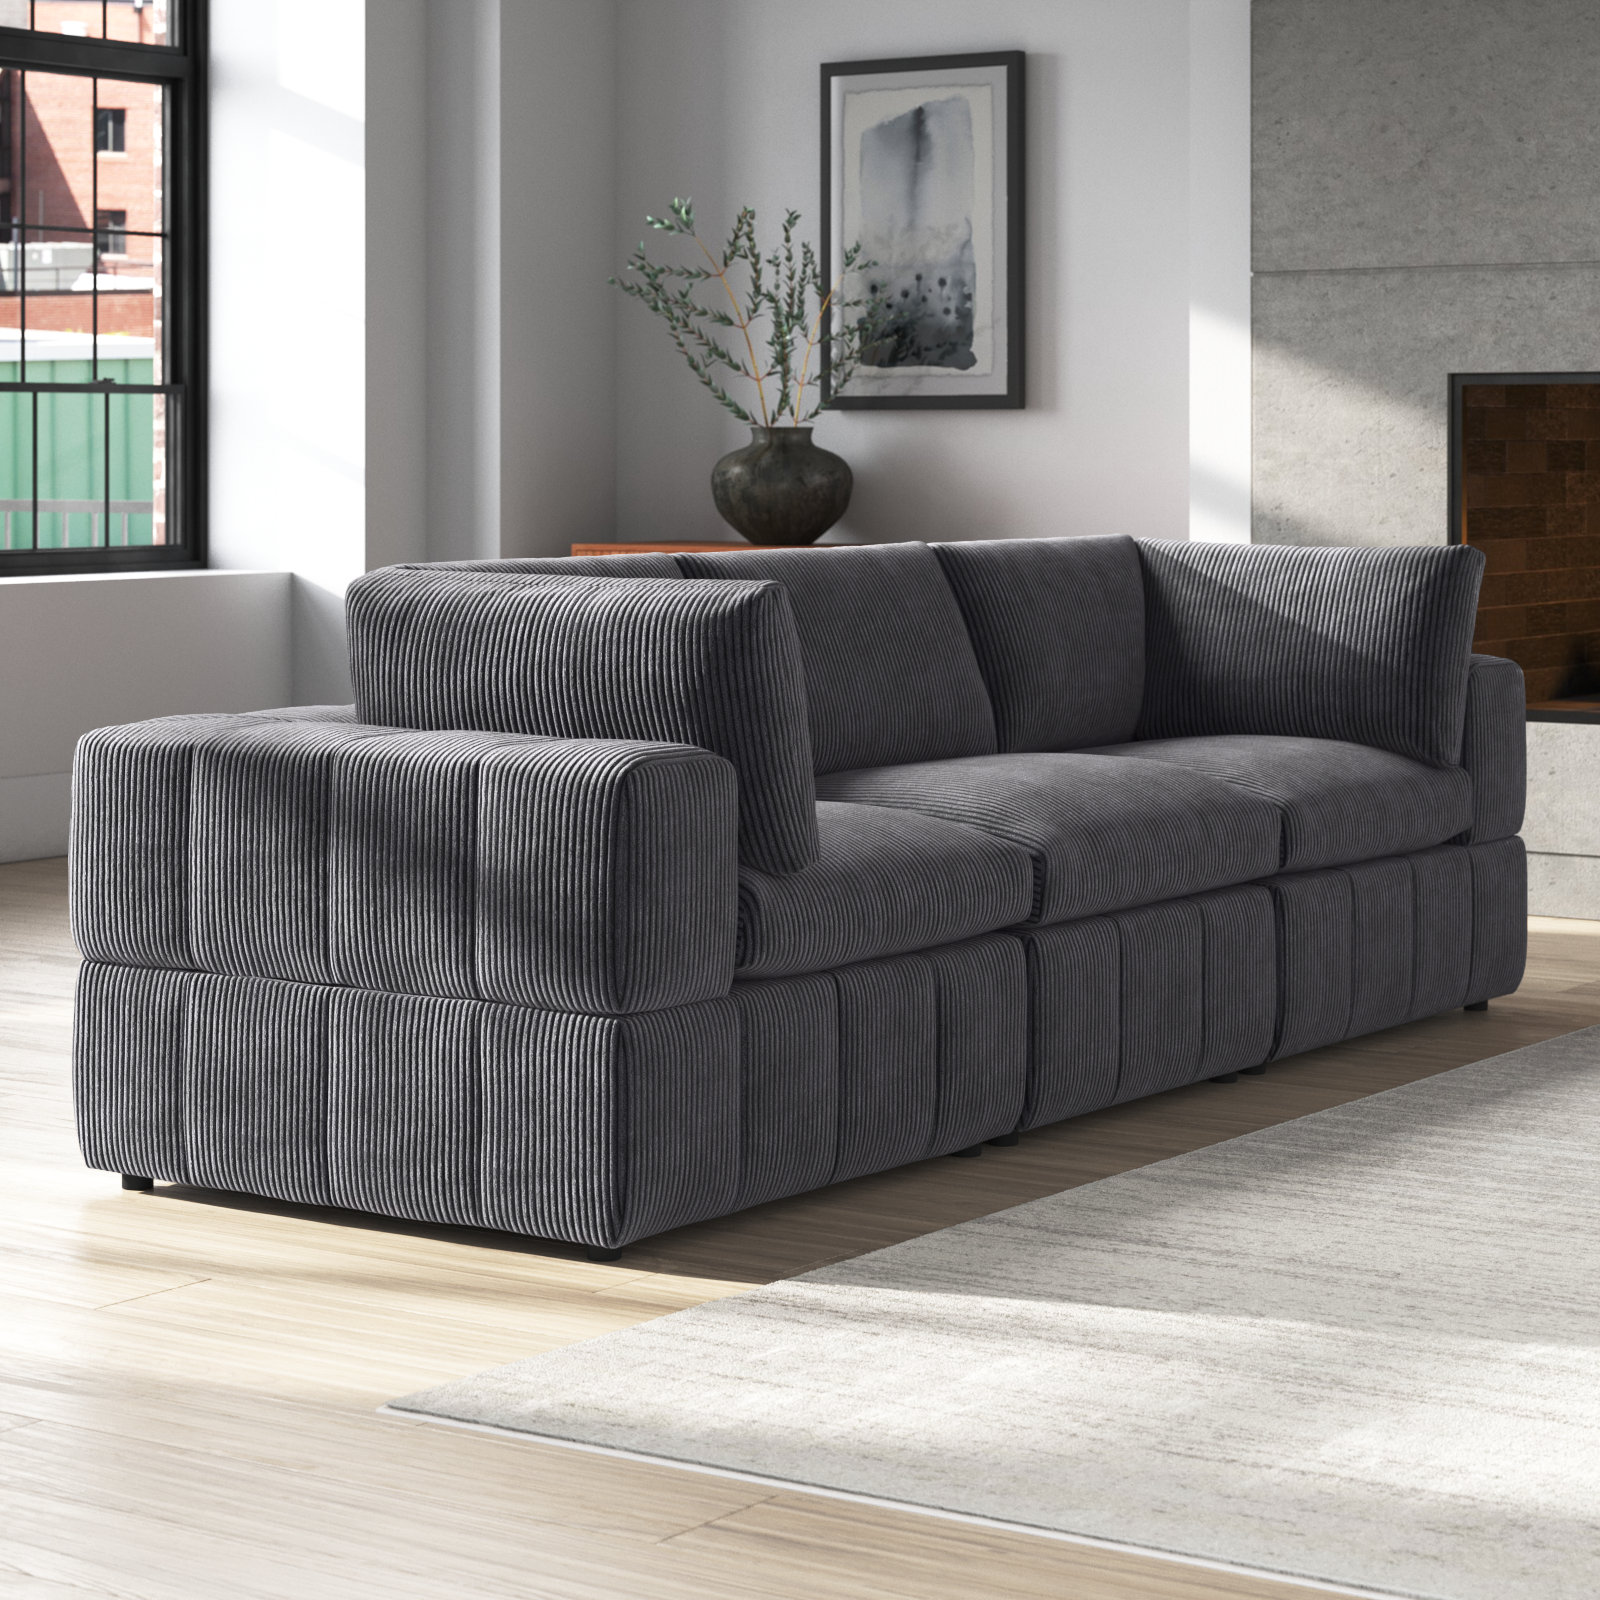 88 Luxury Modern Sofa for Living Room, Fabric Couch with Solid Wood Frame, Removable Sofa Cushion and Detachable Sofa Cover Latitude Run Fabric: bei